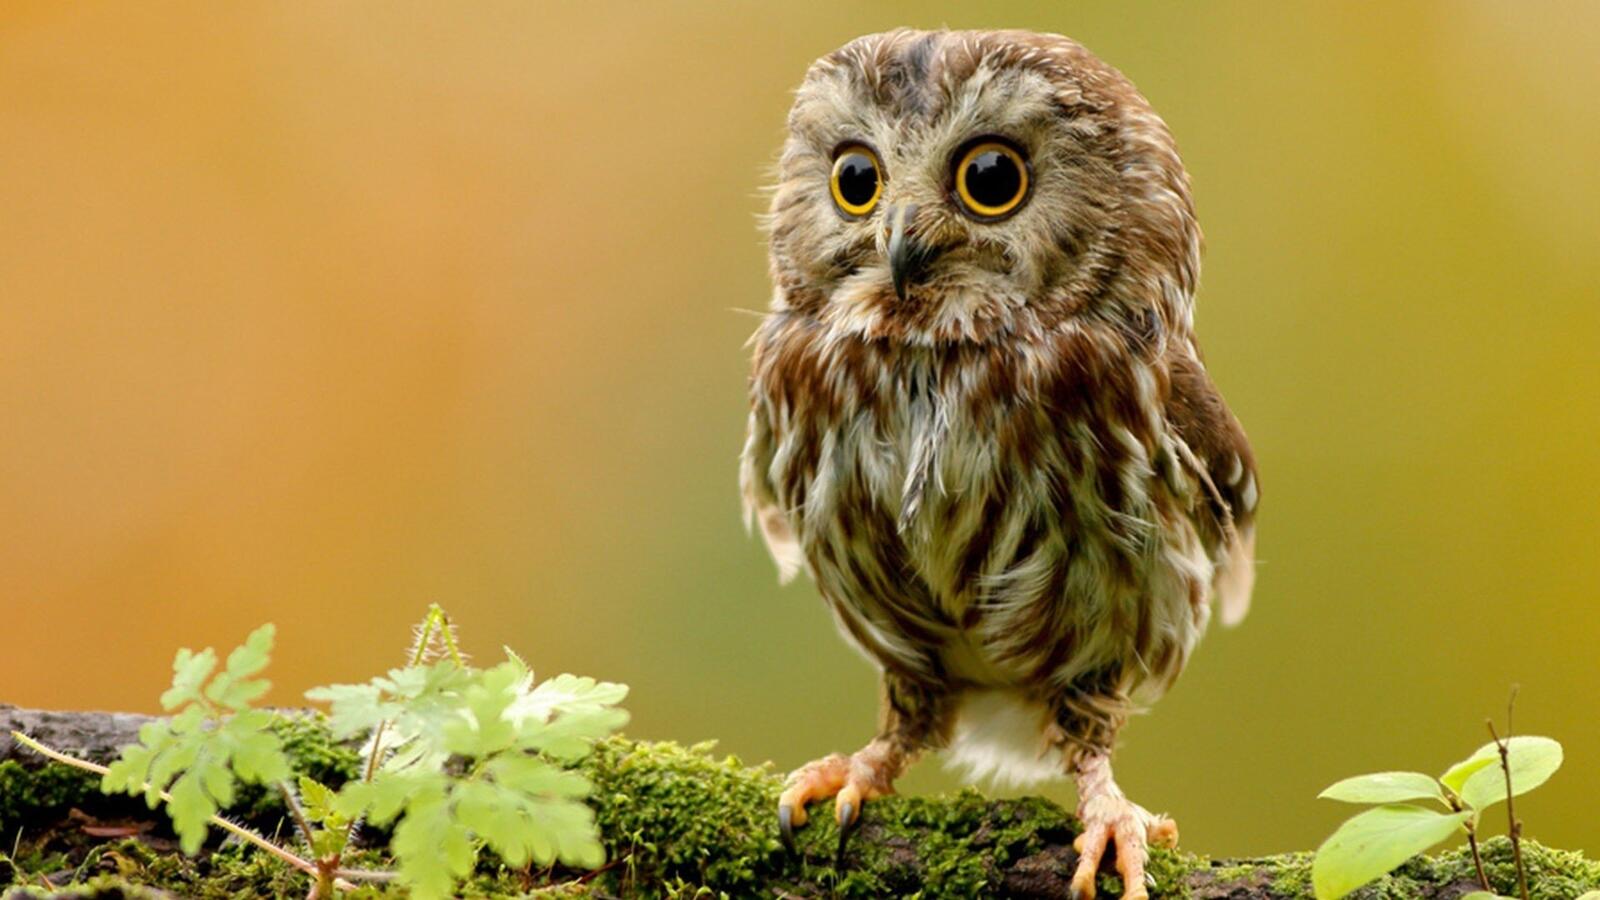 Free photo Funny owl with big round surprised eyes